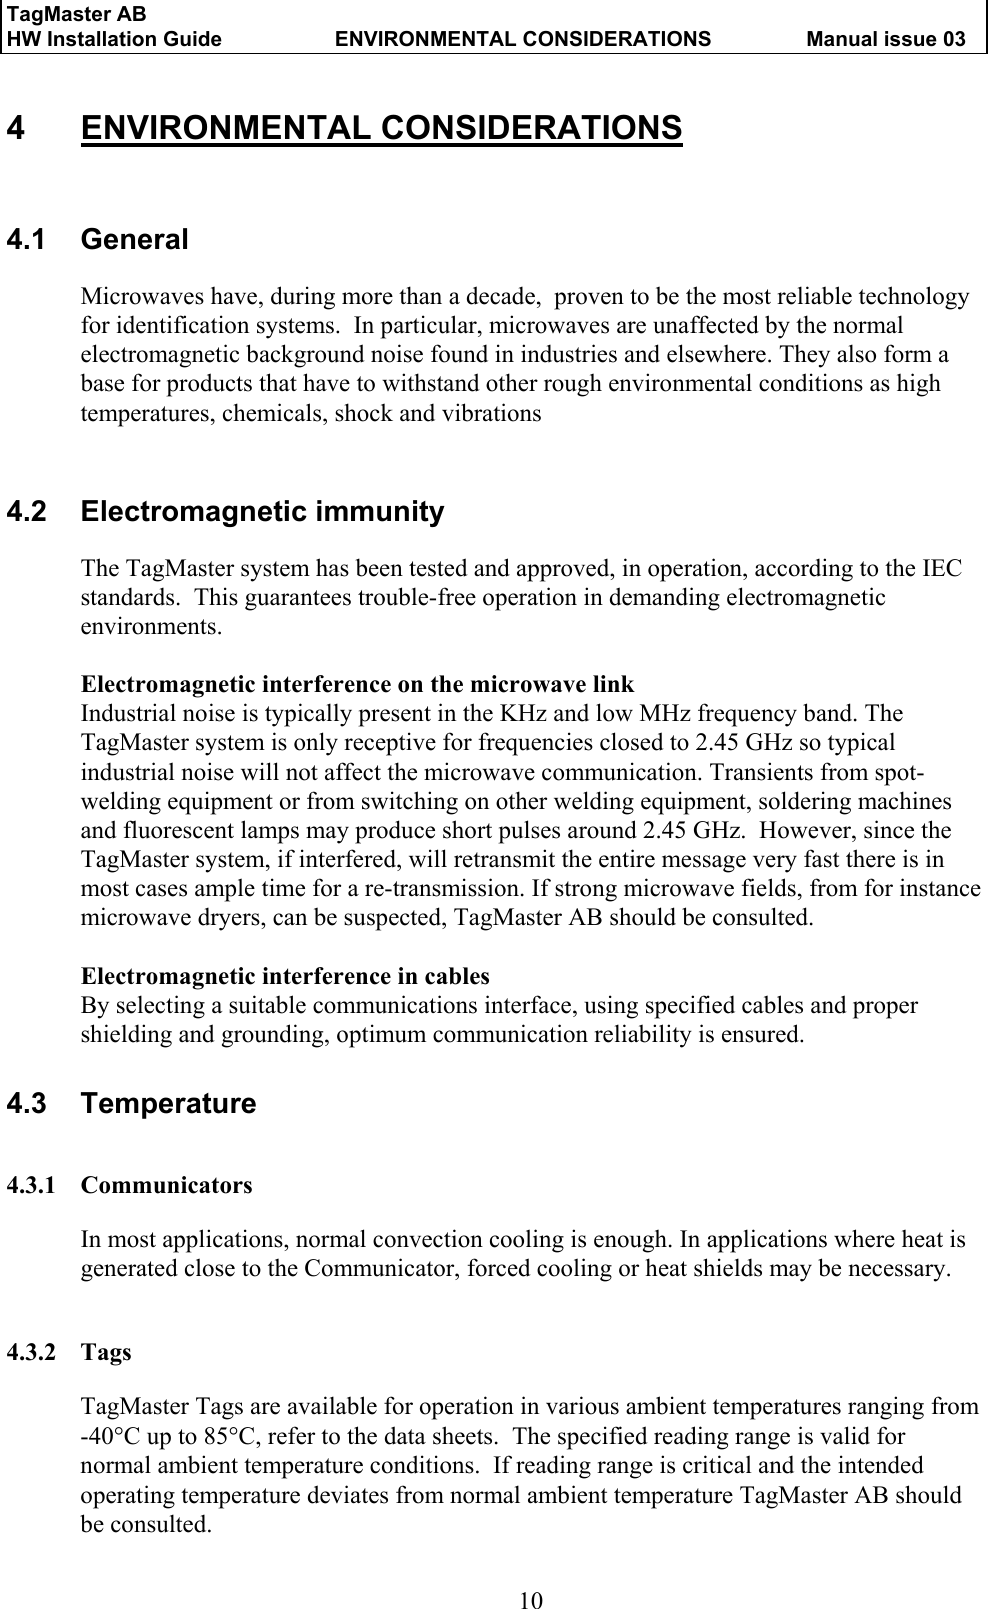 TagMaster AB     HW Installation Guide  ENVIRONMENTAL CONSIDERATIONS  Manual issue 03  10 4 ENVIRONMENTAL CONSIDERATIONS 4.1 General Microwaves have, during more than a decade,  proven to be the most reliable technology for identification systems.  In particular, microwaves are unaffected by the normal electromagnetic background noise found in industries and elsewhere. They also form a base for products that have to withstand other rough environmental conditions as high temperatures, chemicals, shock and vibrations   4.2 Electromagnetic immunity The TagMaster system has been tested and approved, in operation, according to the IEC standards.  This guarantees trouble-free operation in demanding electromagnetic environments.  Electromagnetic interference on the microwave link Industrial noise is typically present in the KHz and low MHz frequency band. The TagMaster system is only receptive for frequencies closed to 2.45 GHz so typical industrial noise will not affect the microwave communication. Transients from spot-welding equipment or from switching on other welding equipment, soldering machines and fluorescent lamps may produce short pulses around 2.45 GHz.  However, since the TagMaster system, if interfered, will retransmit the entire message very fast there is in most cases ample time for a re-transmission. If strong microwave fields, from for instance microwave dryers, can be suspected, TagMaster AB should be consulted.  Electromagnetic interference in cables By selecting a suitable communications interface, using specified cables and proper shielding and grounding, optimum communication reliability is ensured. 4.3 Temperature 4.3.1 Communicators In most applications, normal convection cooling is enough. In applications where heat is generated close to the Communicator, forced cooling or heat shields may be necessary.   4.3.2 Tags TagMaster Tags are available for operation in various ambient temperatures ranging from -40°C up to 85°C, refer to the data sheets.  The specified reading range is valid for normal ambient temperature conditions.  If reading range is critical and the intended operating temperature deviates from normal ambient temperature TagMaster AB should be consulted. 